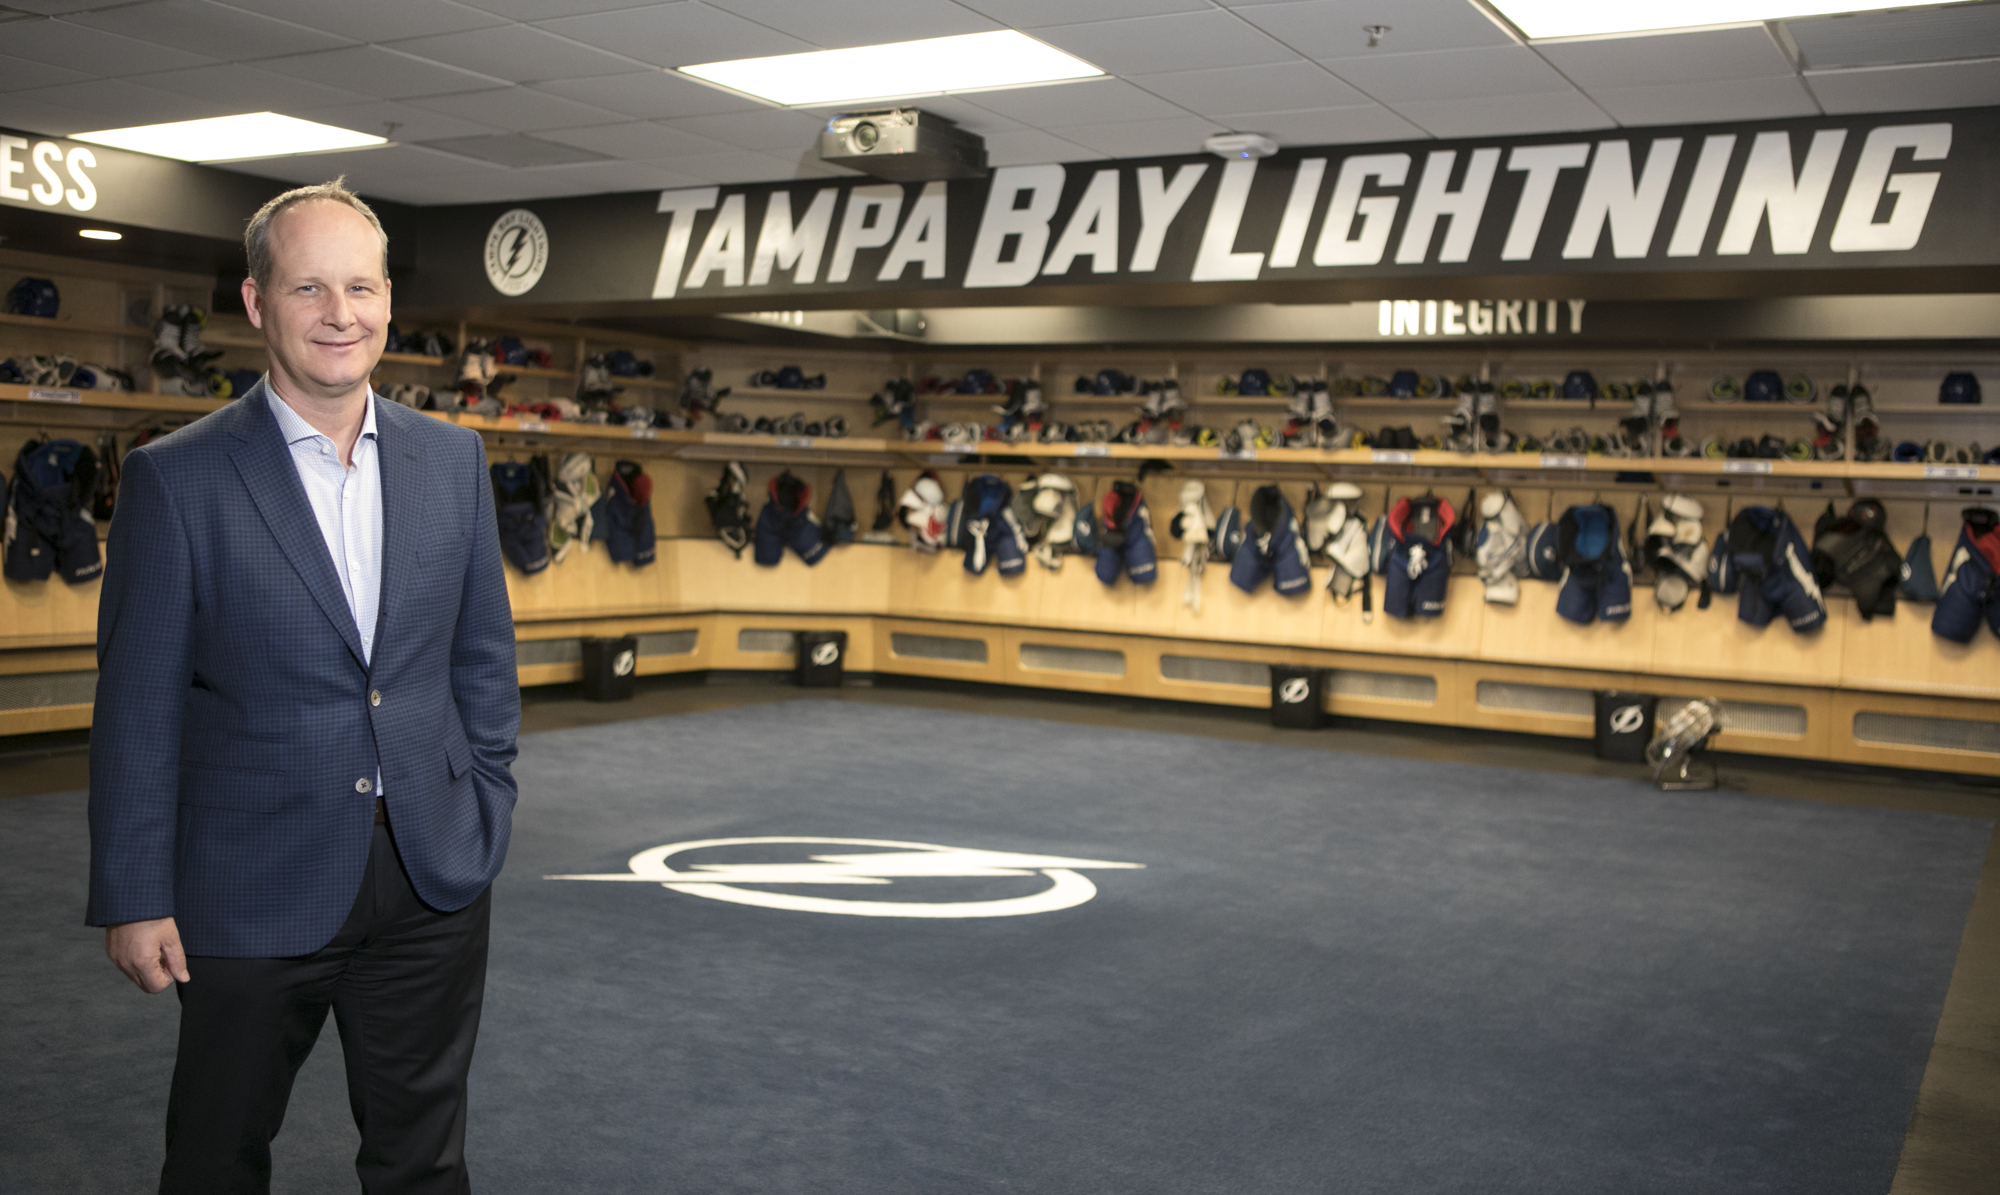 Steve Griggs was named CEO of Tampa Bay Lightning and some related entities in 2015.